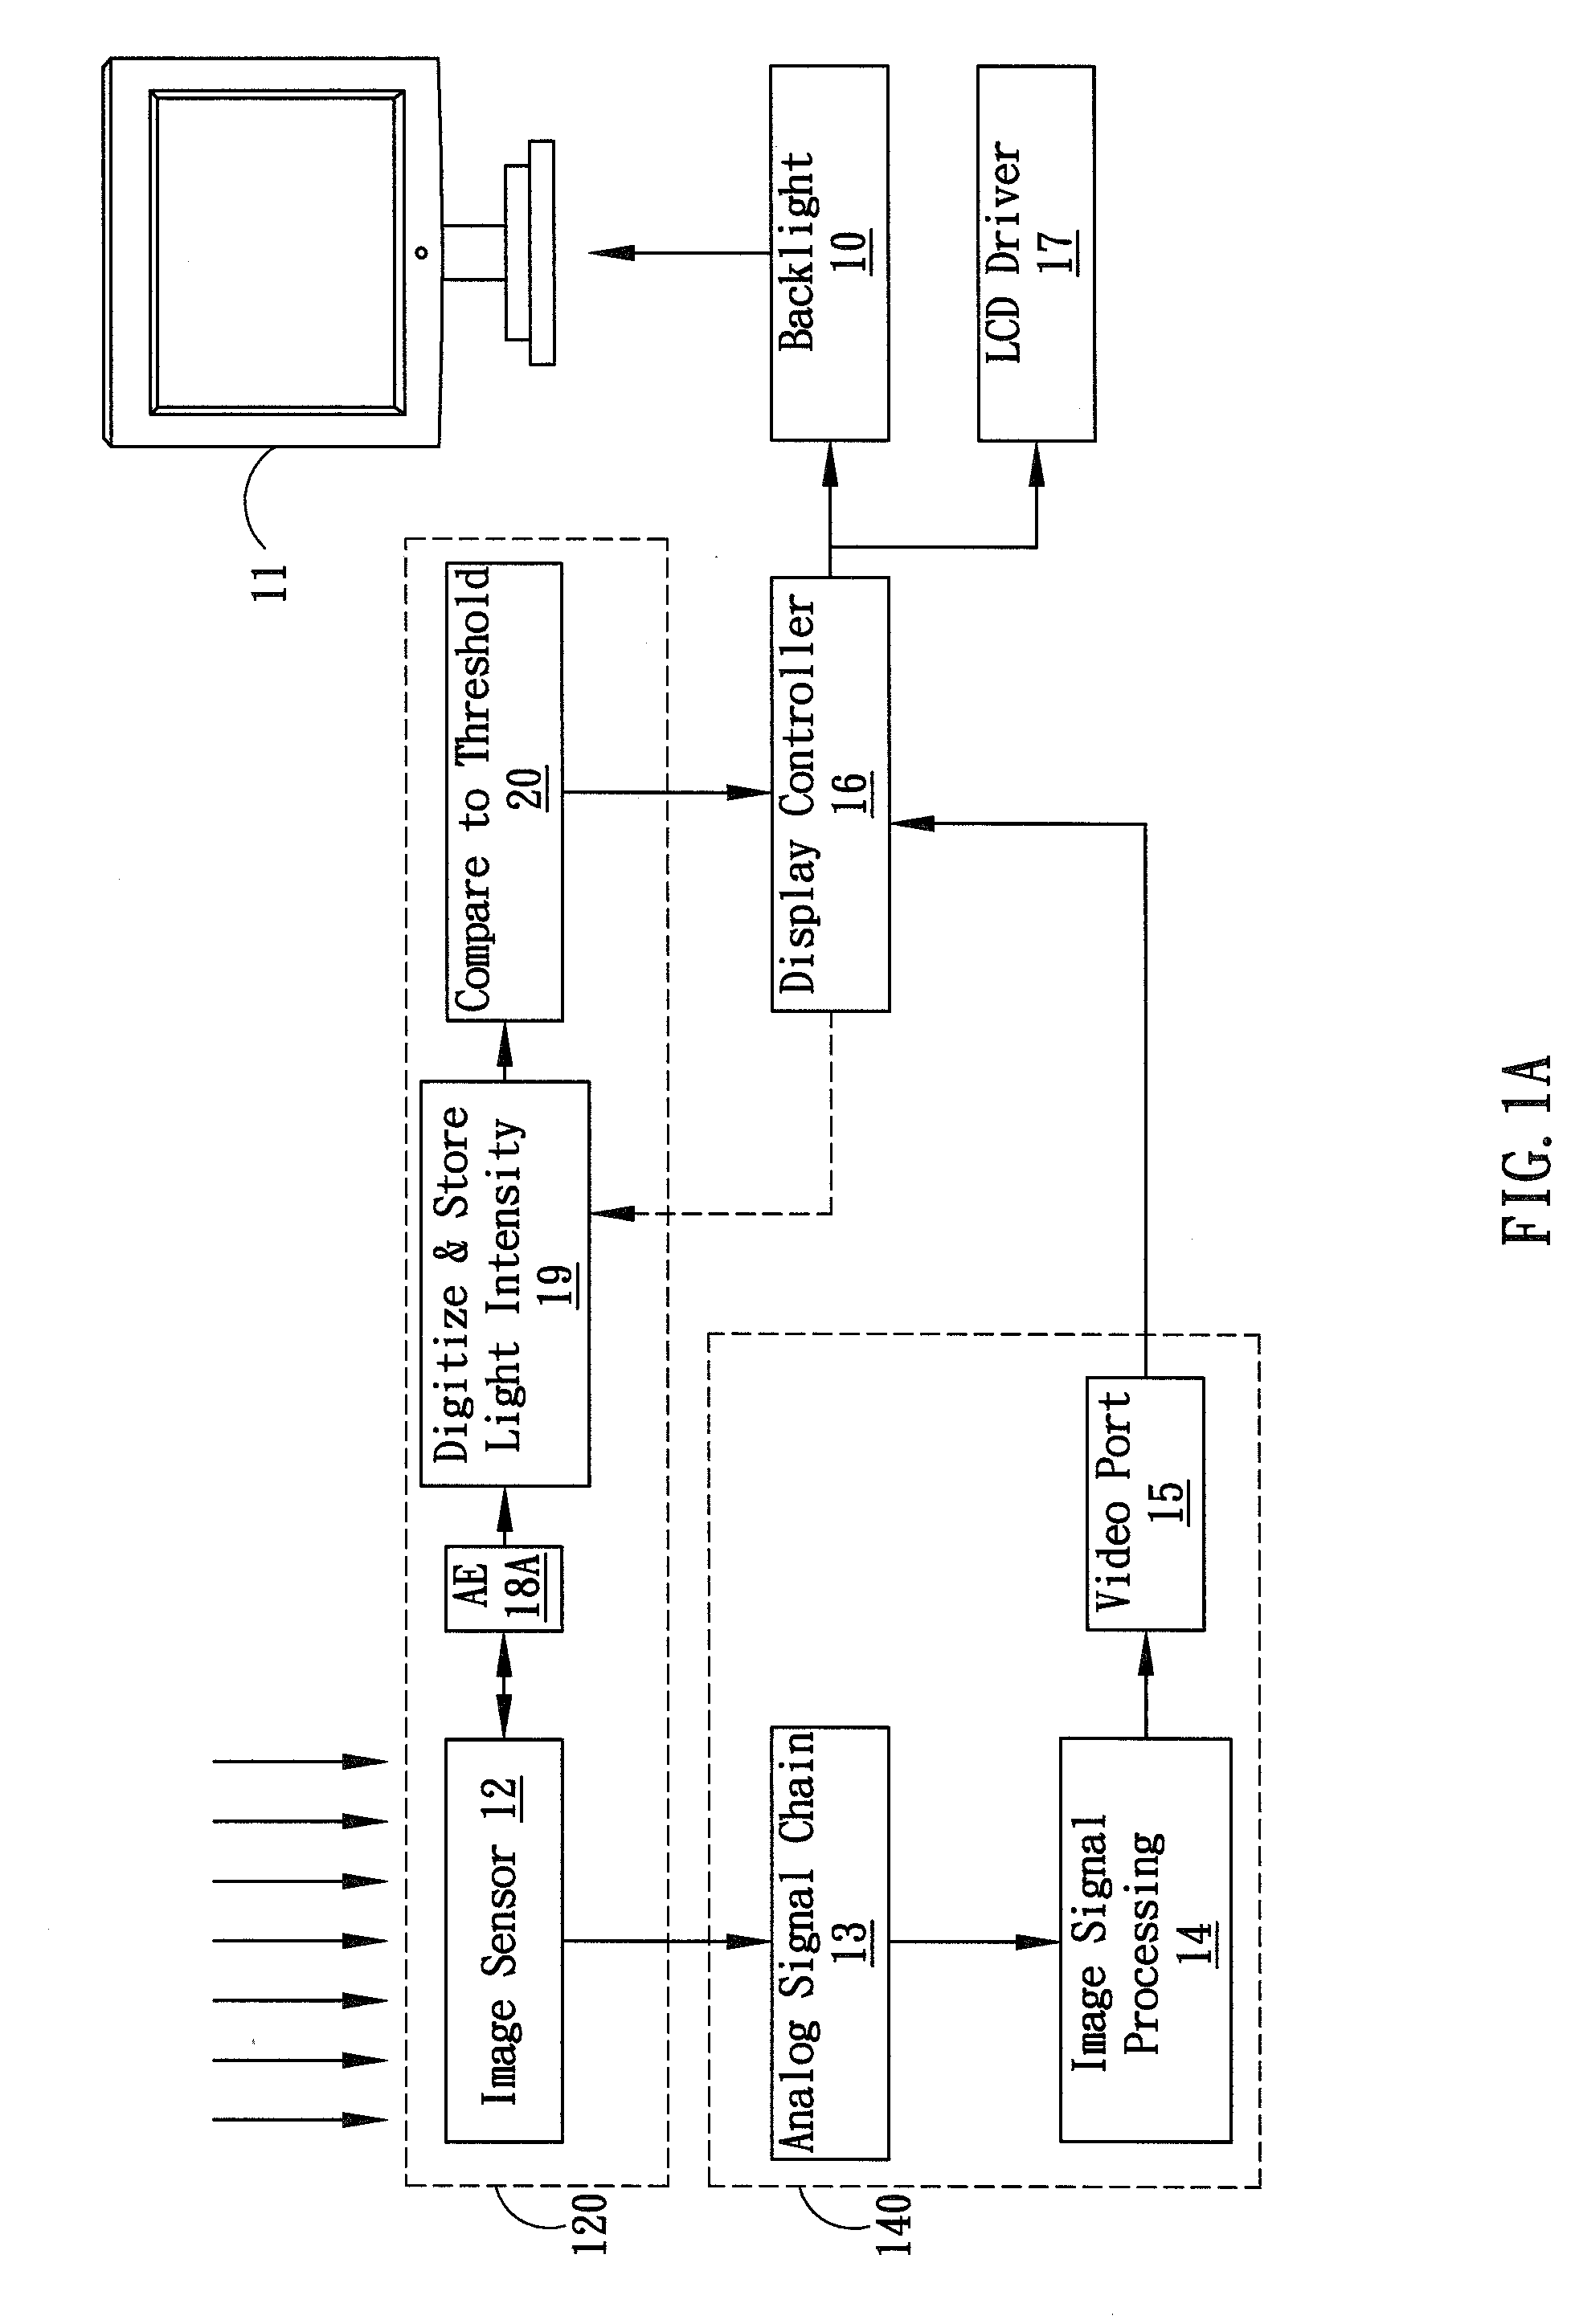 Image Sensor with Integrated Light Meter for Controlling Display Brightness